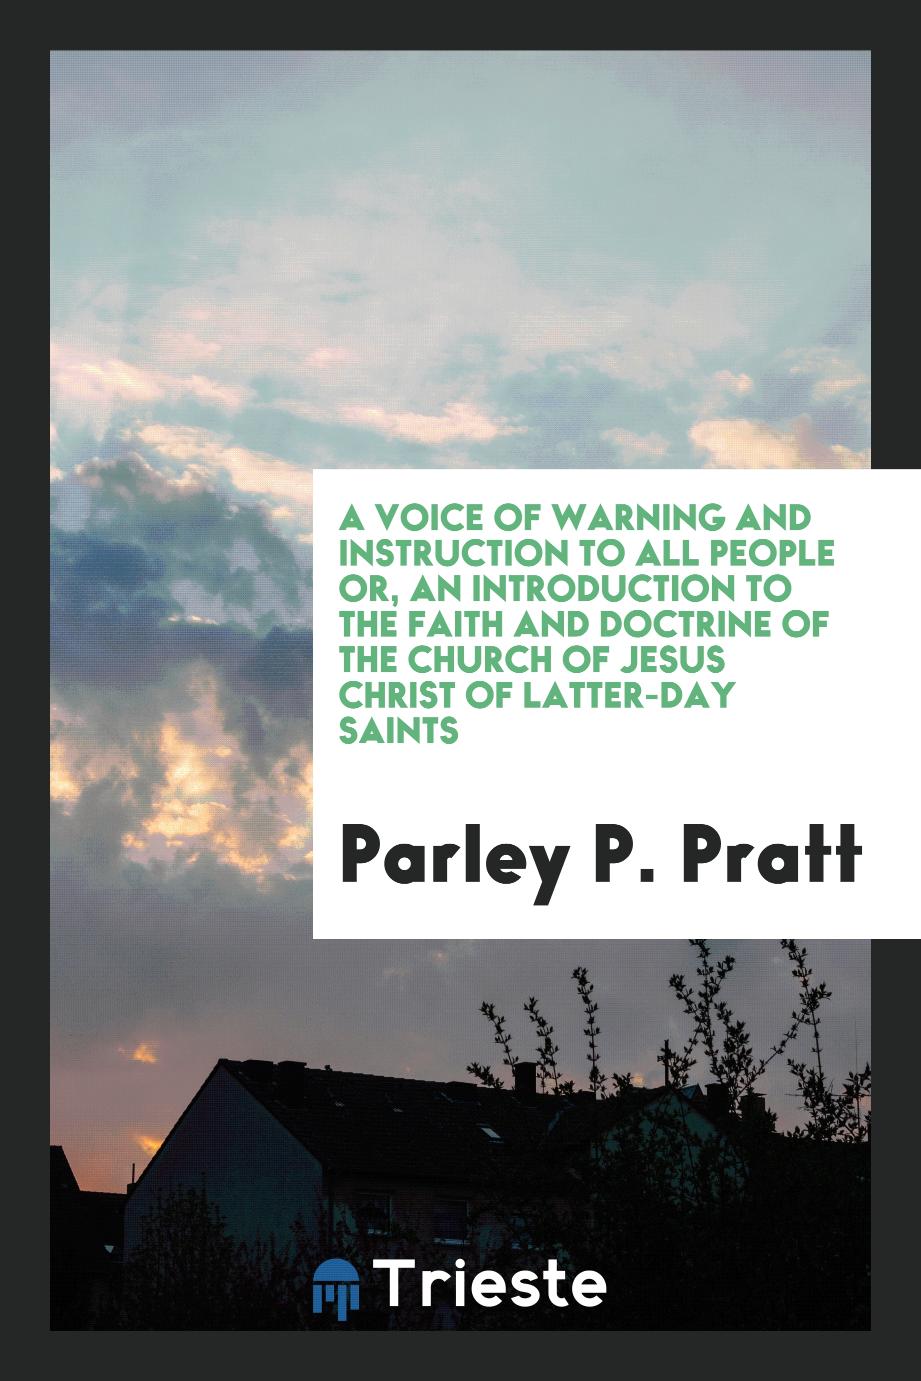 A voice of warning and instruction to all people or, An introduction to the faith and doctrine of the Church of Jesus Christ of Latter-day Saints